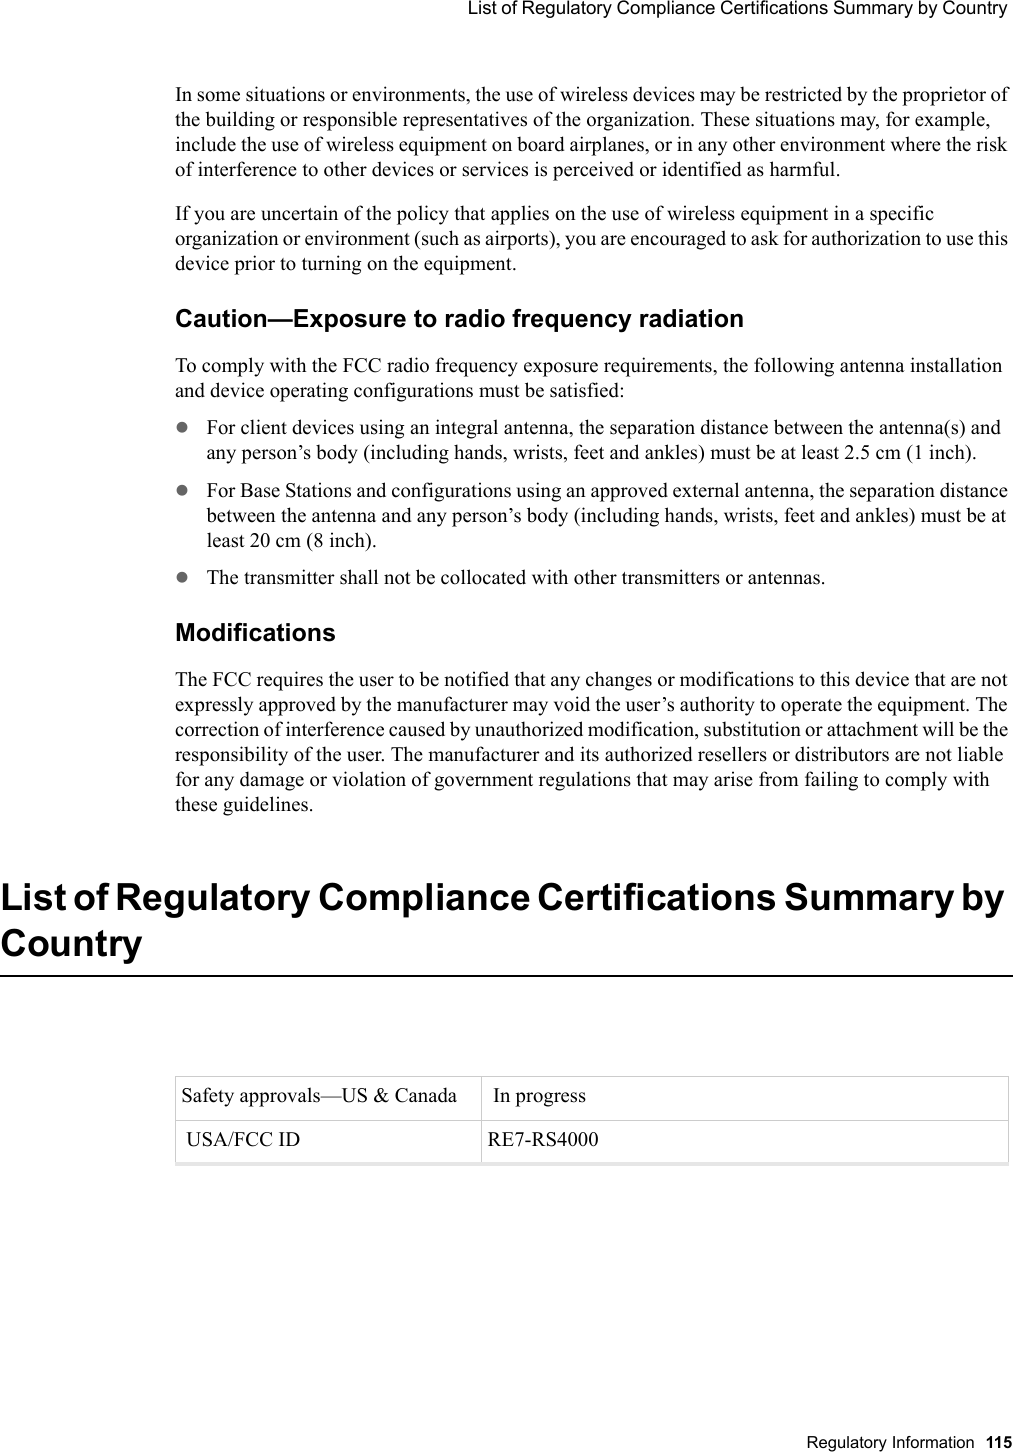  List of Regulatory Compliance Certifications Summary by Country Regulatory Information 115 In some situations or environments, the use of wireless devices may be restricted by the proprietor of the building or responsible representatives of the organization. These situations may, for example, include the use of wireless equipment on board airplanes, or in any other environment where the risk of interference to other devices or services is perceived or identified as harmful. If you are uncertain of the policy that applies on the use of wireless equipment in a specific organization or environment (such as airports), you are encouraged to ask for authorization to use this device prior to turning on the equipment. Caution—Exposure to radio frequency radiationTo comply with the FCC radio frequency exposure requirements, the following antenna installation and device operating configurations must be satisfied:zFor client devices using an integral antenna, the separation distance between the antenna(s) and any person’s body (including hands, wrists, feet and ankles) must be at least 2.5 cm (1 inch).zFor Base Stations and configurations using an approved external antenna, the separation distance between the antenna and any person’s body (including hands, wrists, feet and ankles) must be at least 20 cm (8 inch). zThe transmitter shall not be collocated with other transmitters or antennas.Modifications The FCC requires the user to be notified that any changes or modifications to this device that are not expressly approved by the manufacturer may void the user’s authority to operate the equipment. The correction of interference caused by unauthorized modification, substitution or attachment will be the responsibility of the user. The manufacturer and its authorized resellers or distributors are not liable for any damage or violation of government regulations that may arise from failing to comply with these guidelines.List of Regulatory Compliance Certifications Summary by CountrySafety approvals—US &amp; Canada   In progress USA/FCC ID  RE7-RS4000